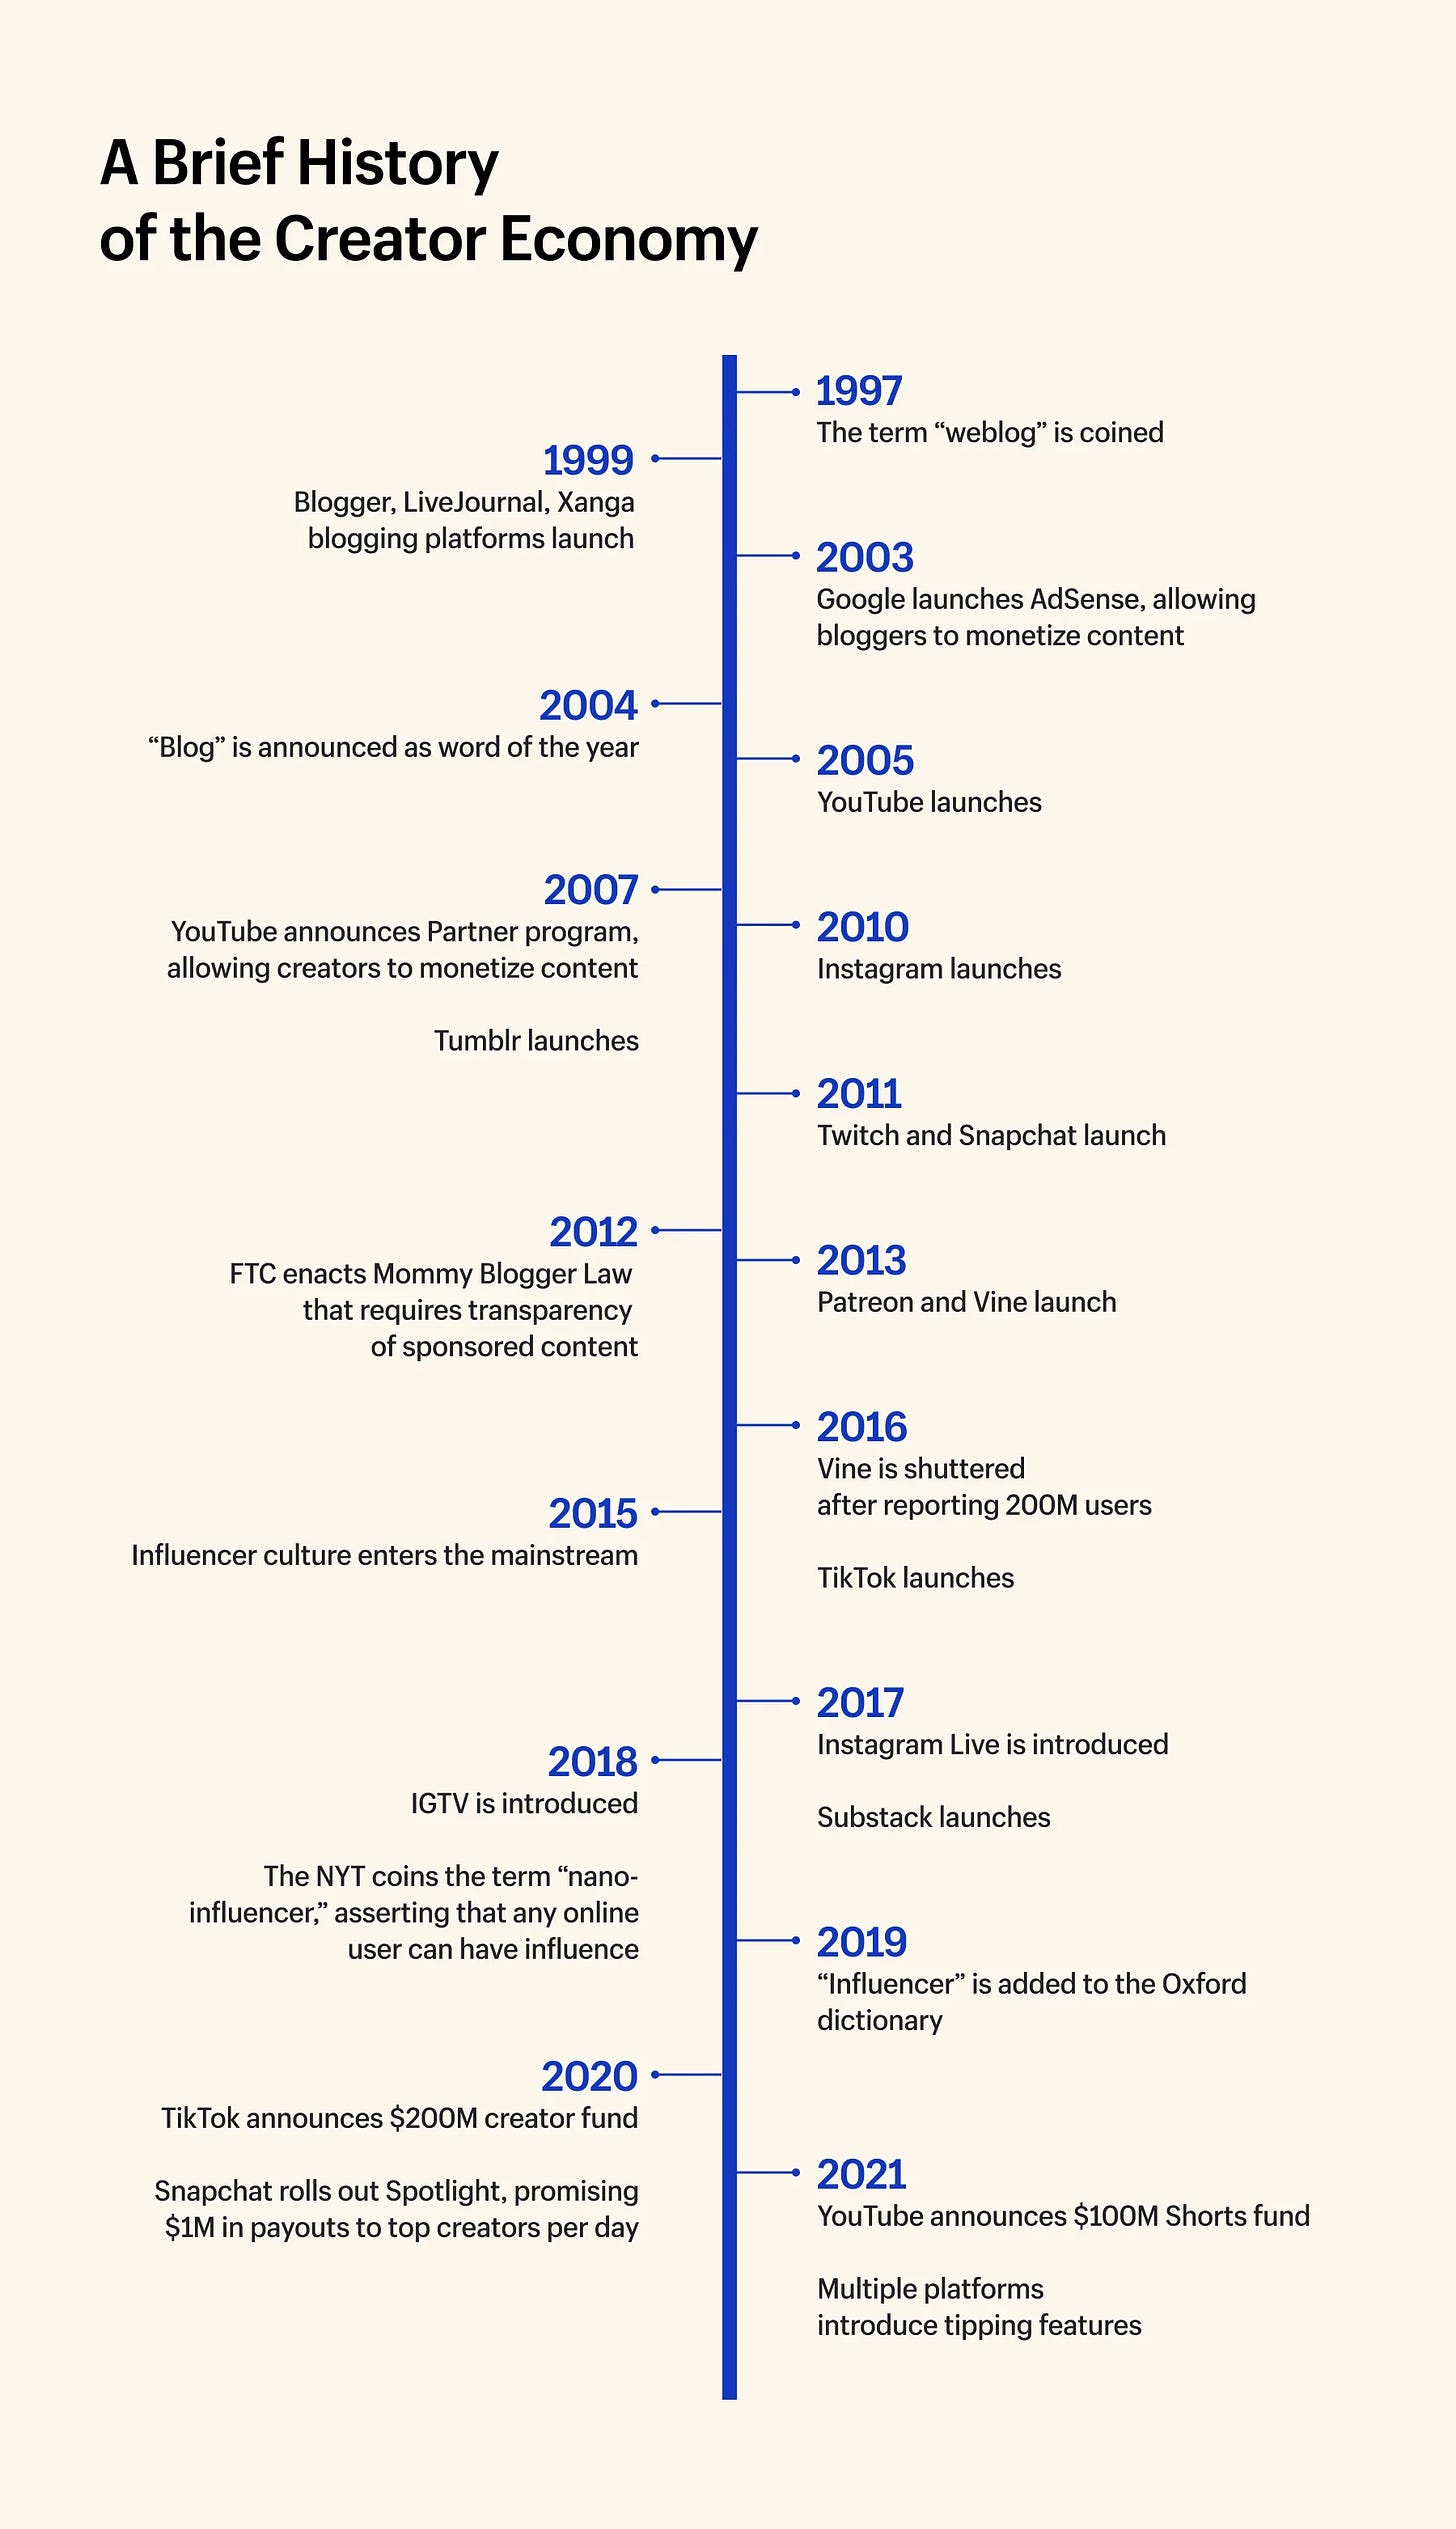 Timeline of the creator economy from 1997 to 2021, highlighting major events and launches